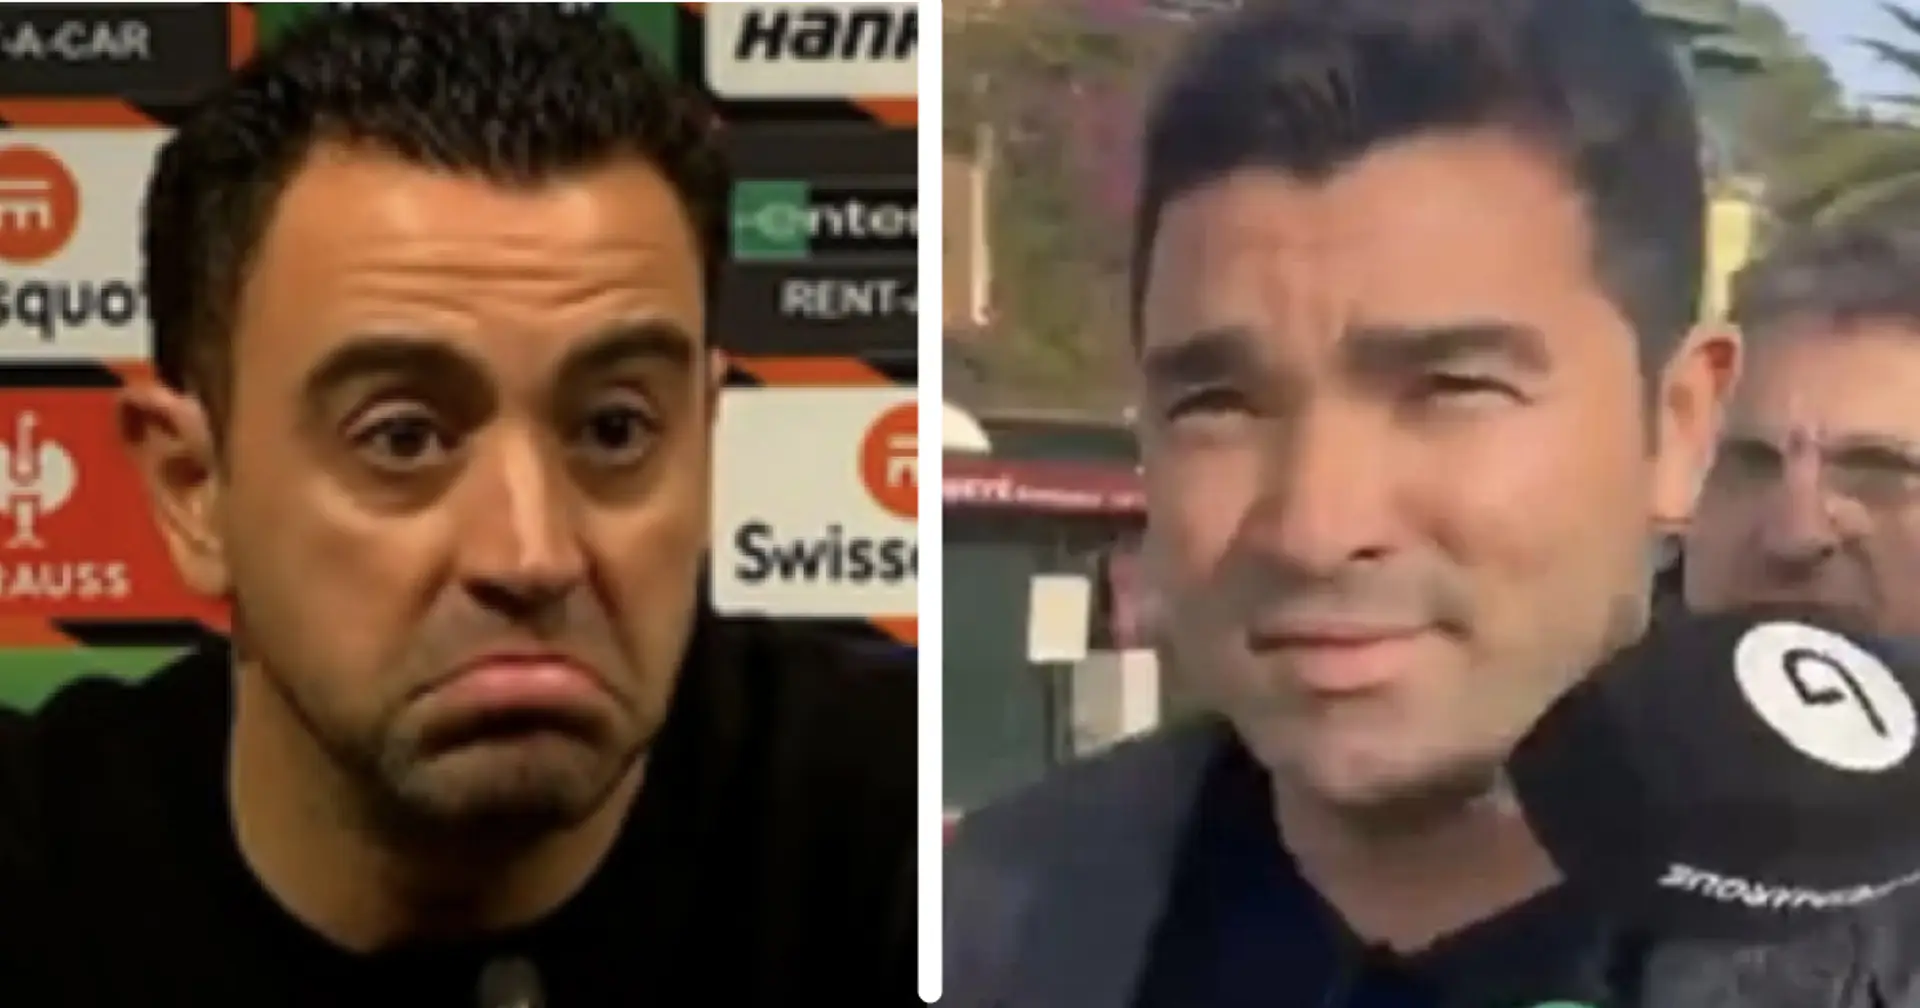 New name emerges as Xavi's possible successor – 6 things make him perfect candidate for Deco